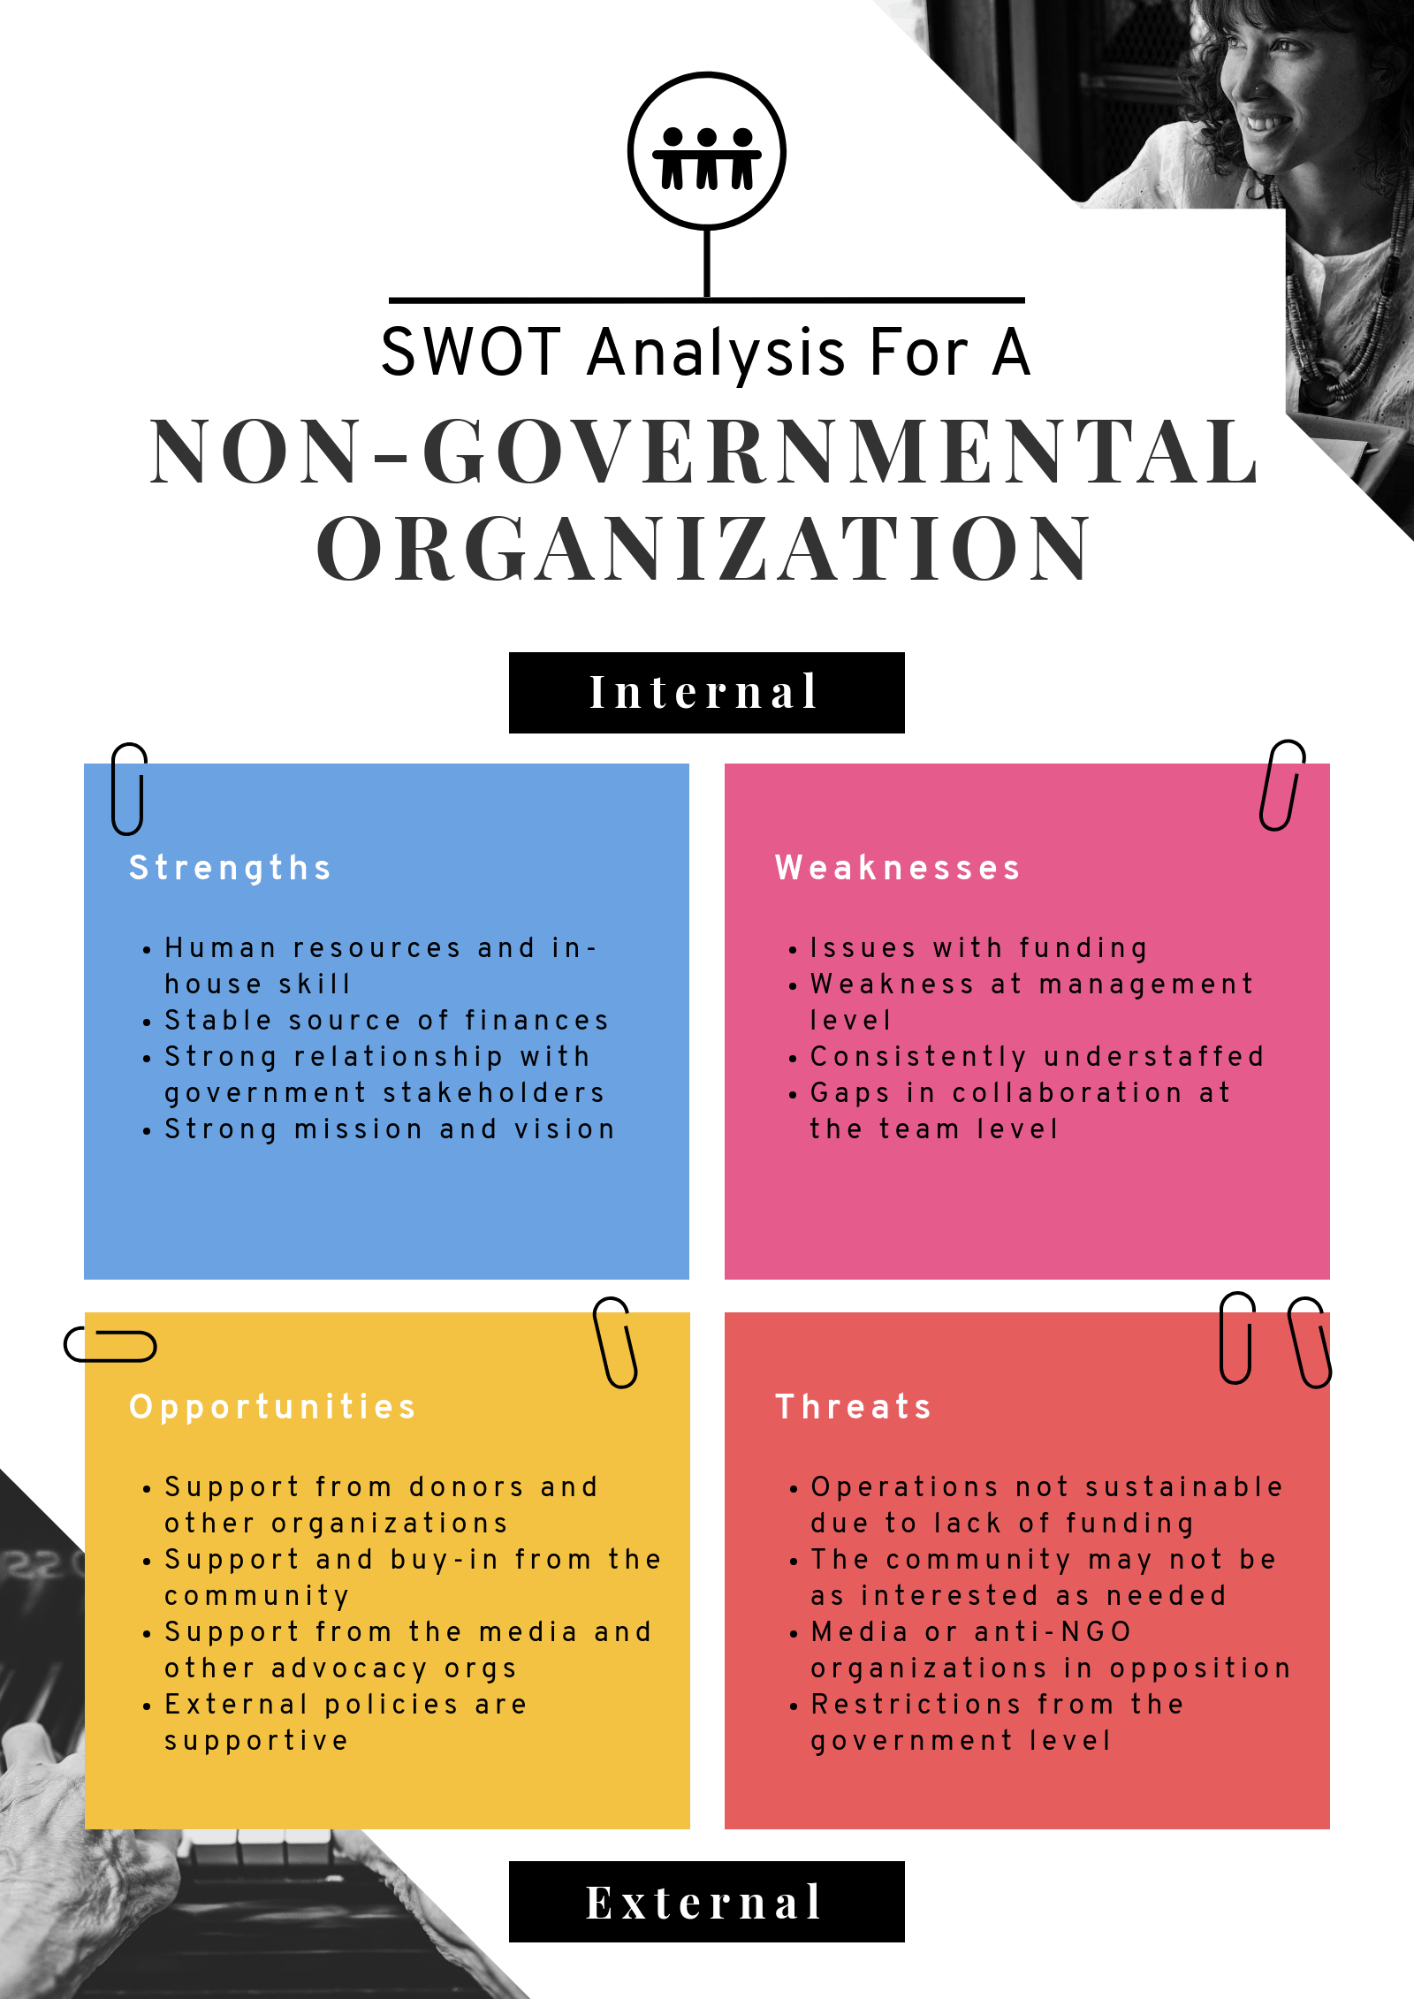 Swot Analysis: How To Structure And Visualize It | Piktochart Regarding Strategic Analysis Report Template